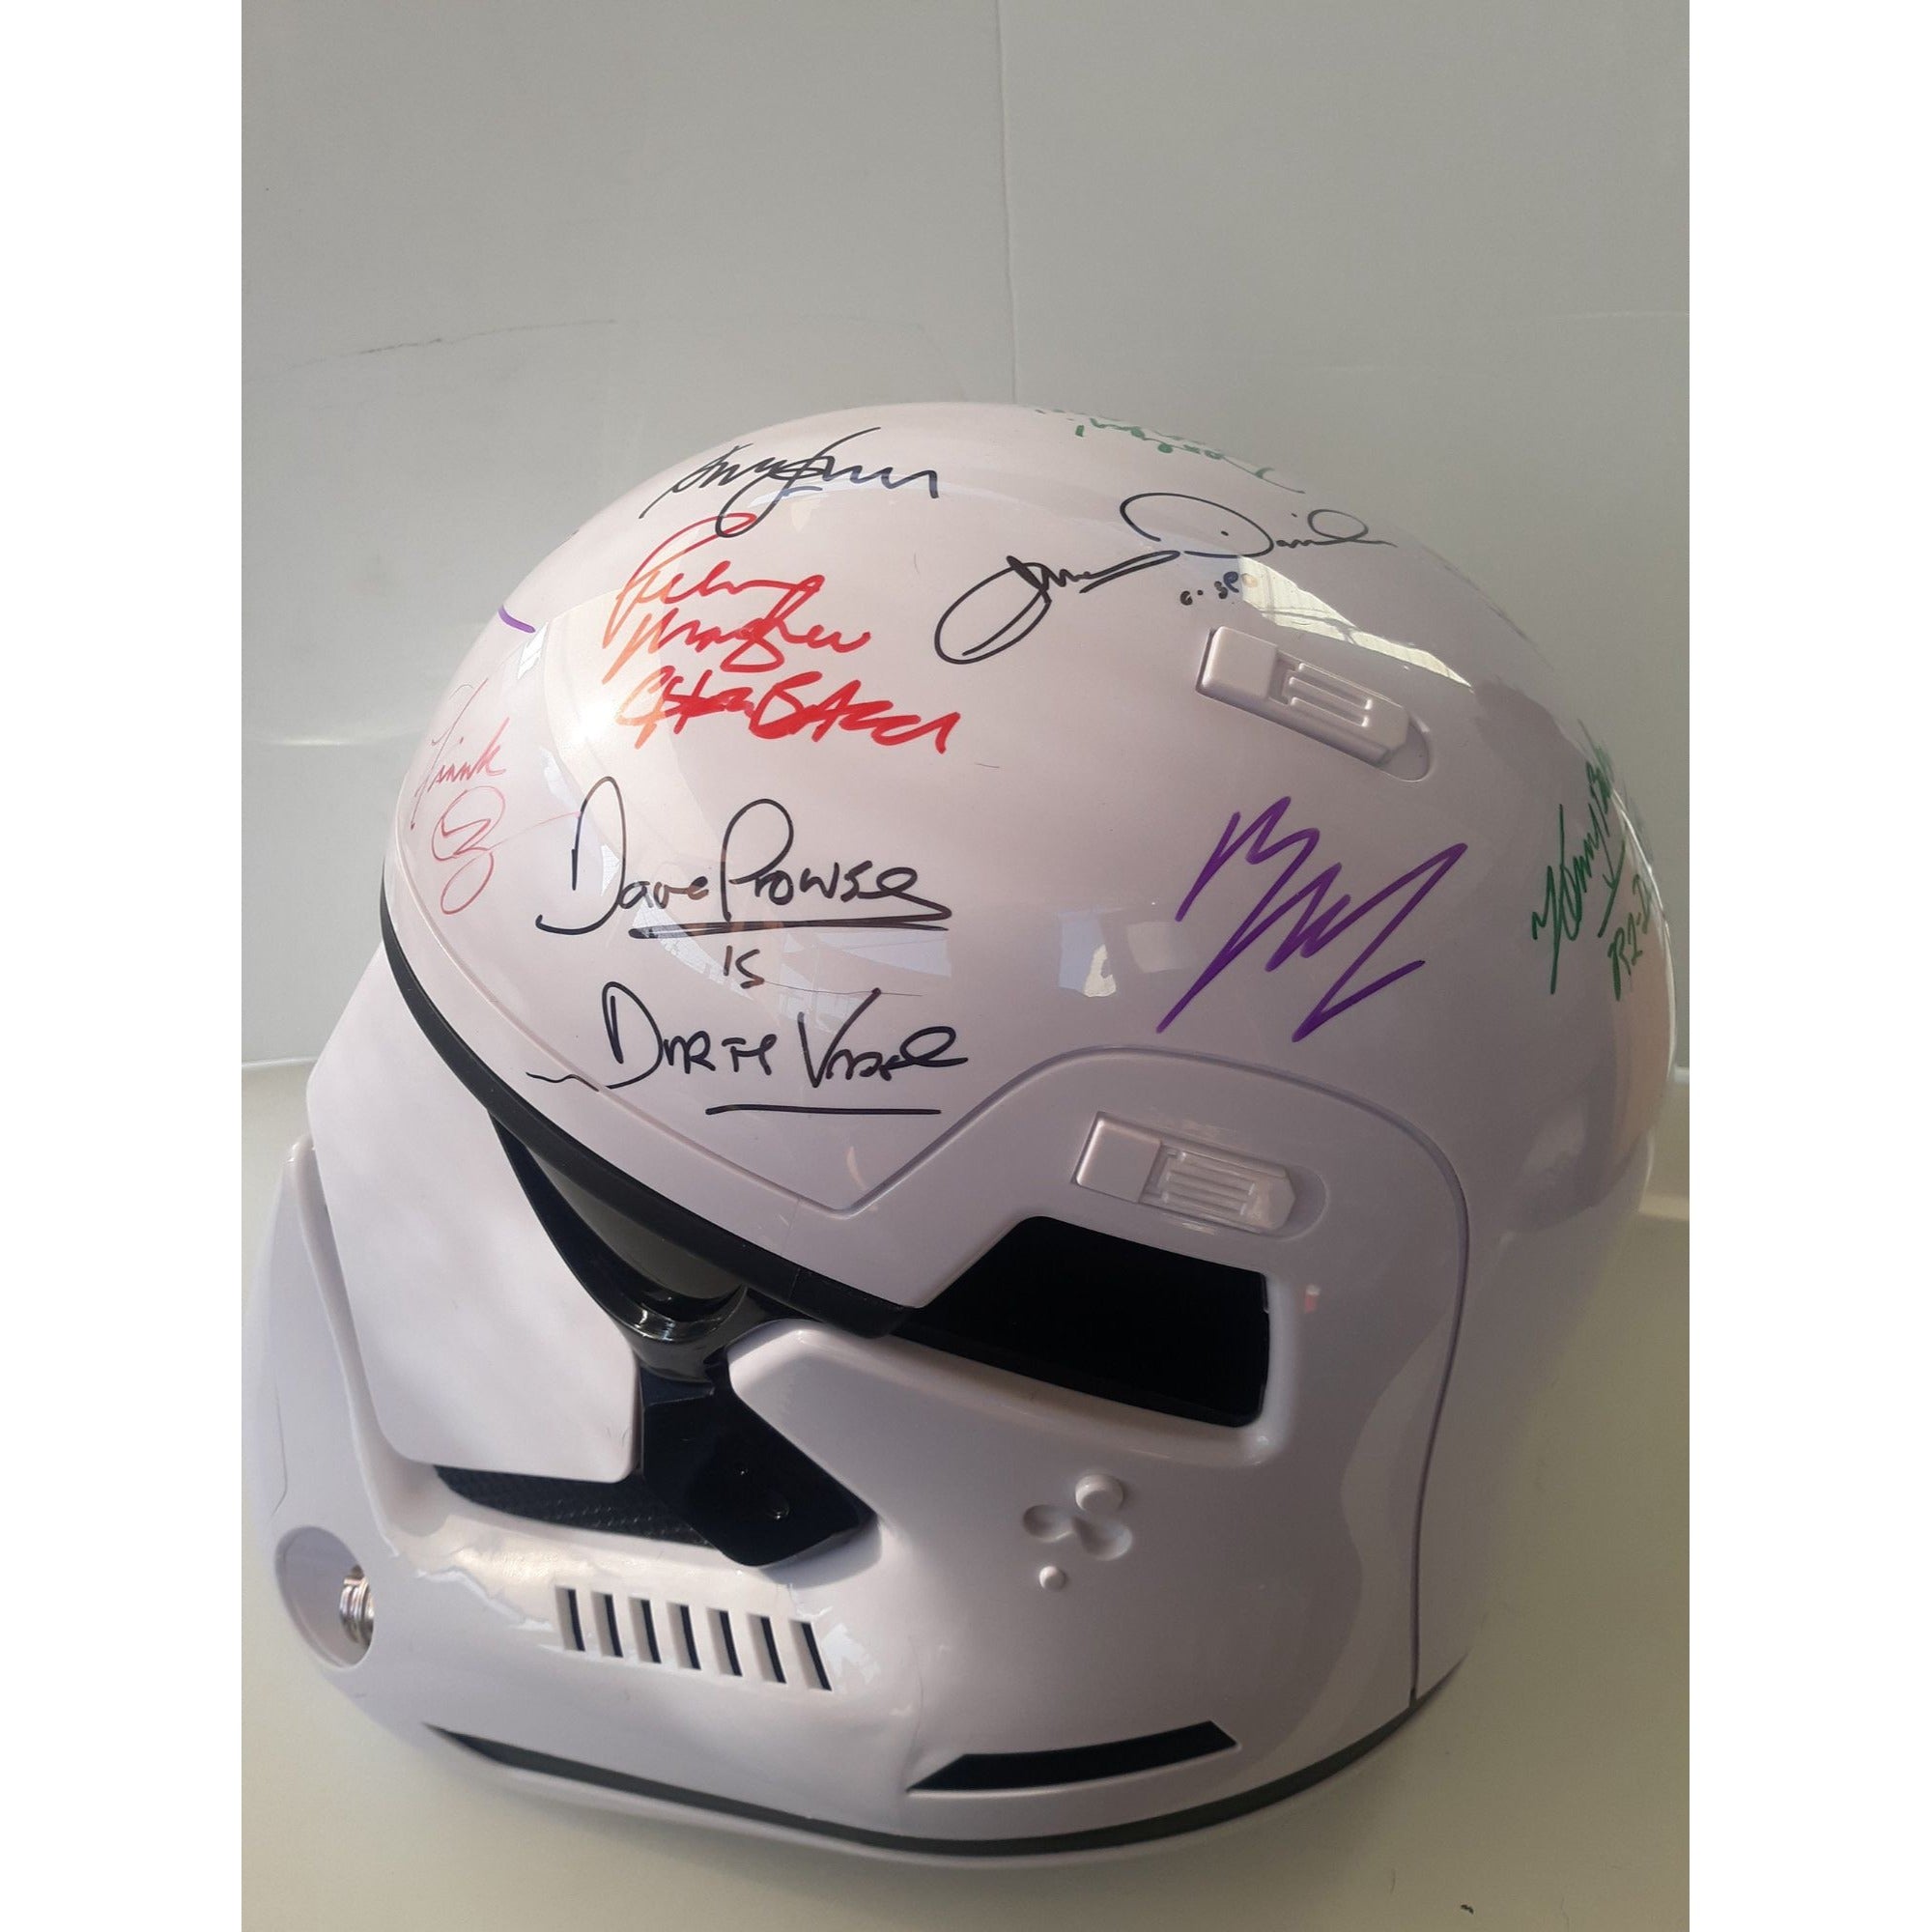 Harrison Ford, James Earl Jones, Carrie Fisher, Mark Hamill, Star Wars cast signed stormtrooper helmet signed with proof